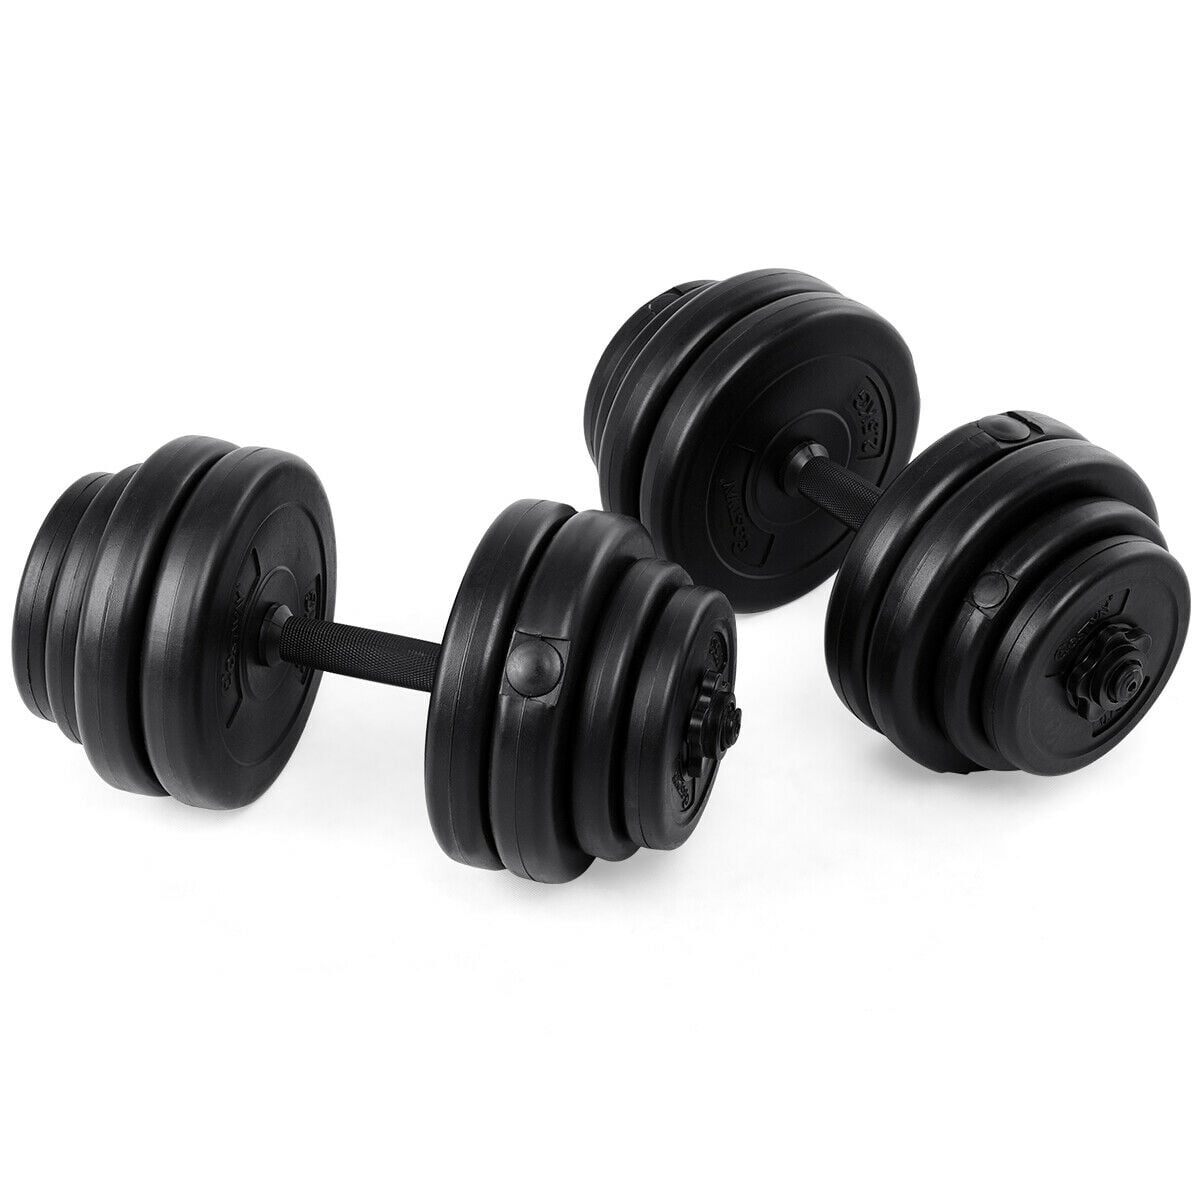 Totall 110/66LB Weight Dumbbell Set Adjustable Gym Barbell Plates Body Workout A 